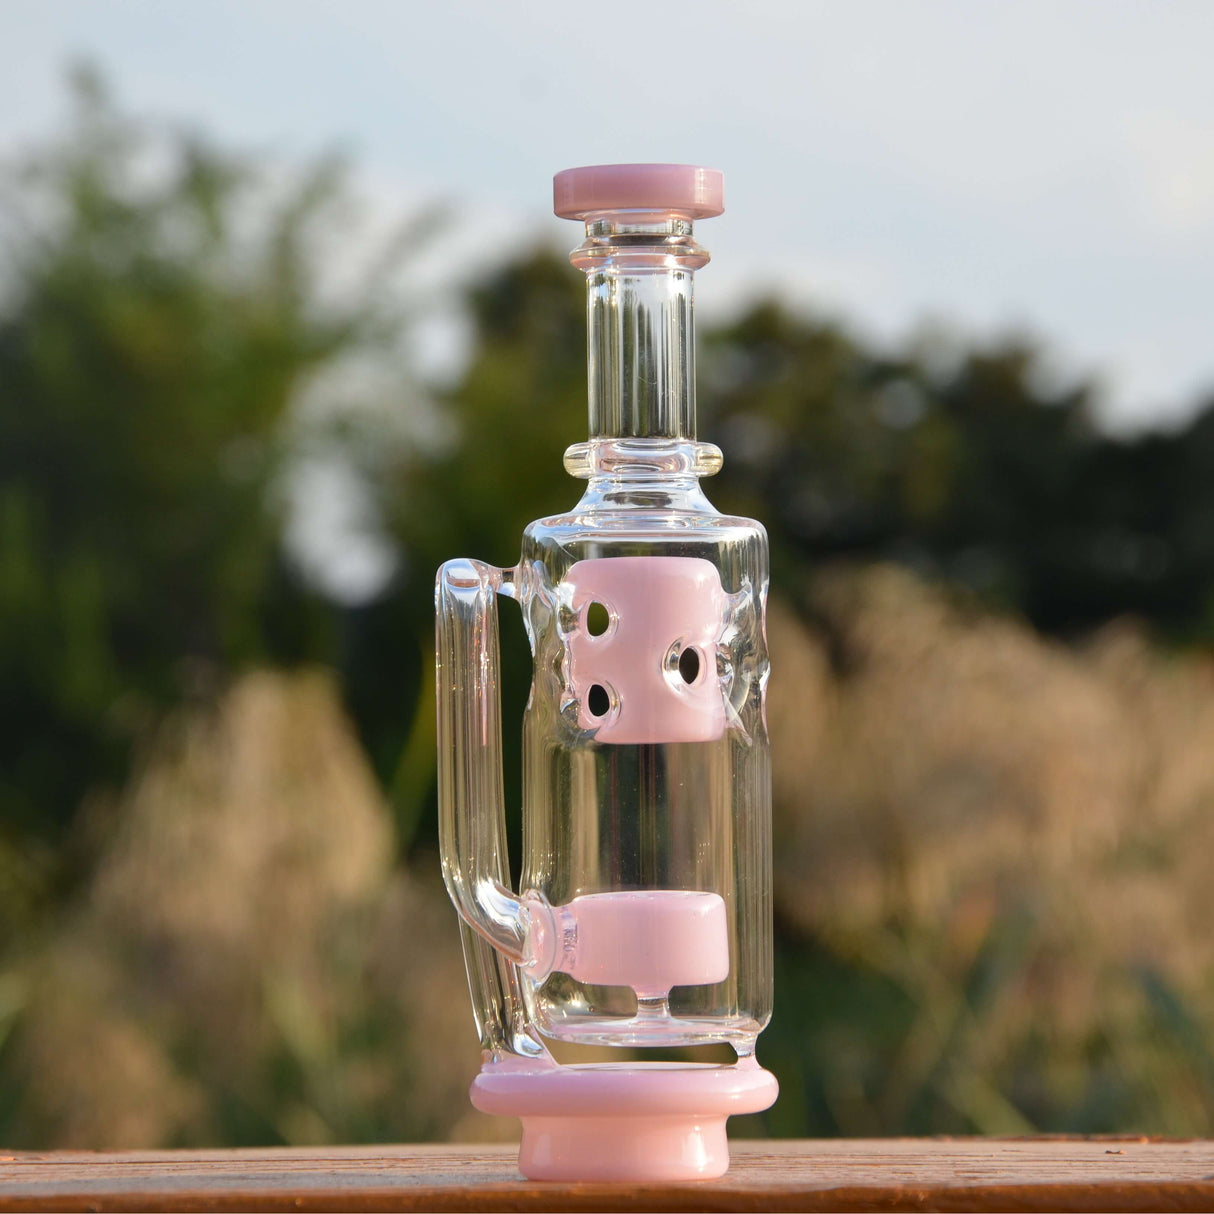 Calibear Straight Fab Carta Attachment in pink, compact borosilicate glass, for e-rigs and vaporizers